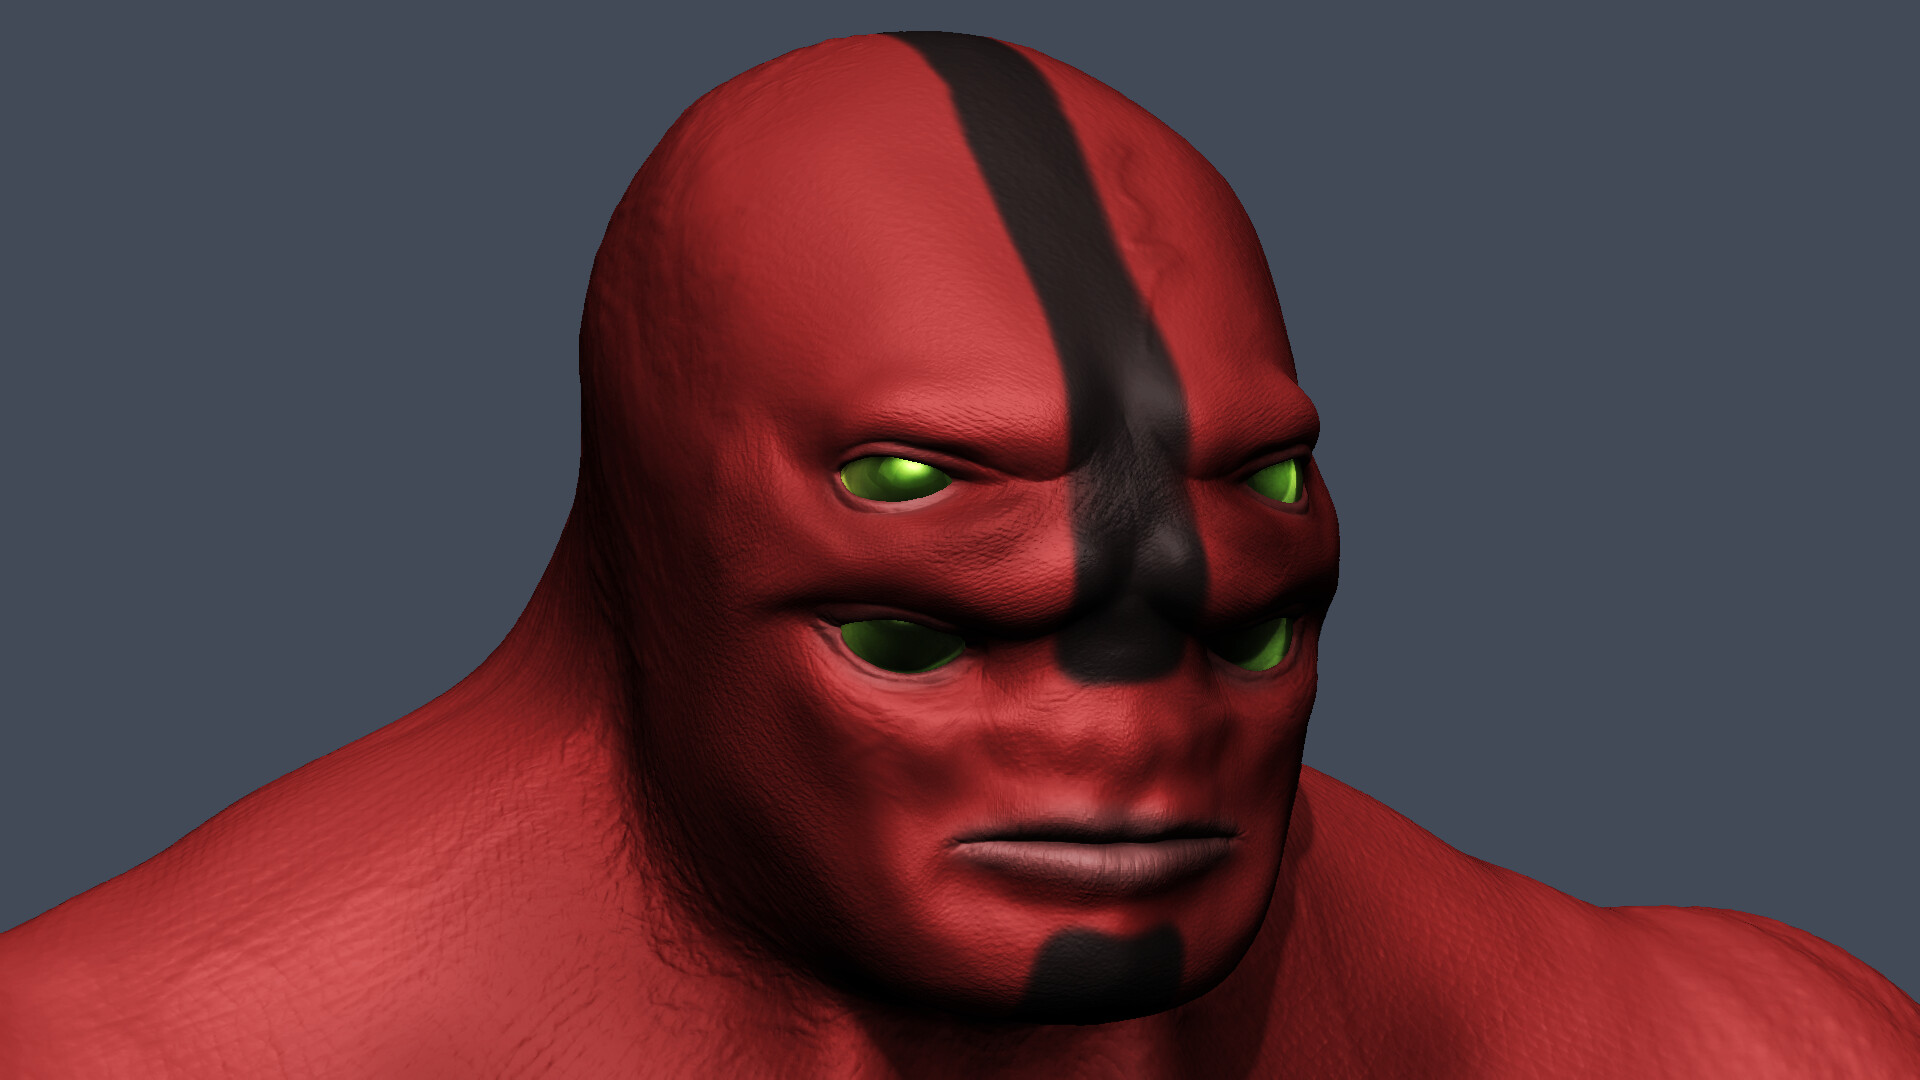 Some 3D fanart of Fourarms from Ben 10 in a realistic artstyle as opposed t...